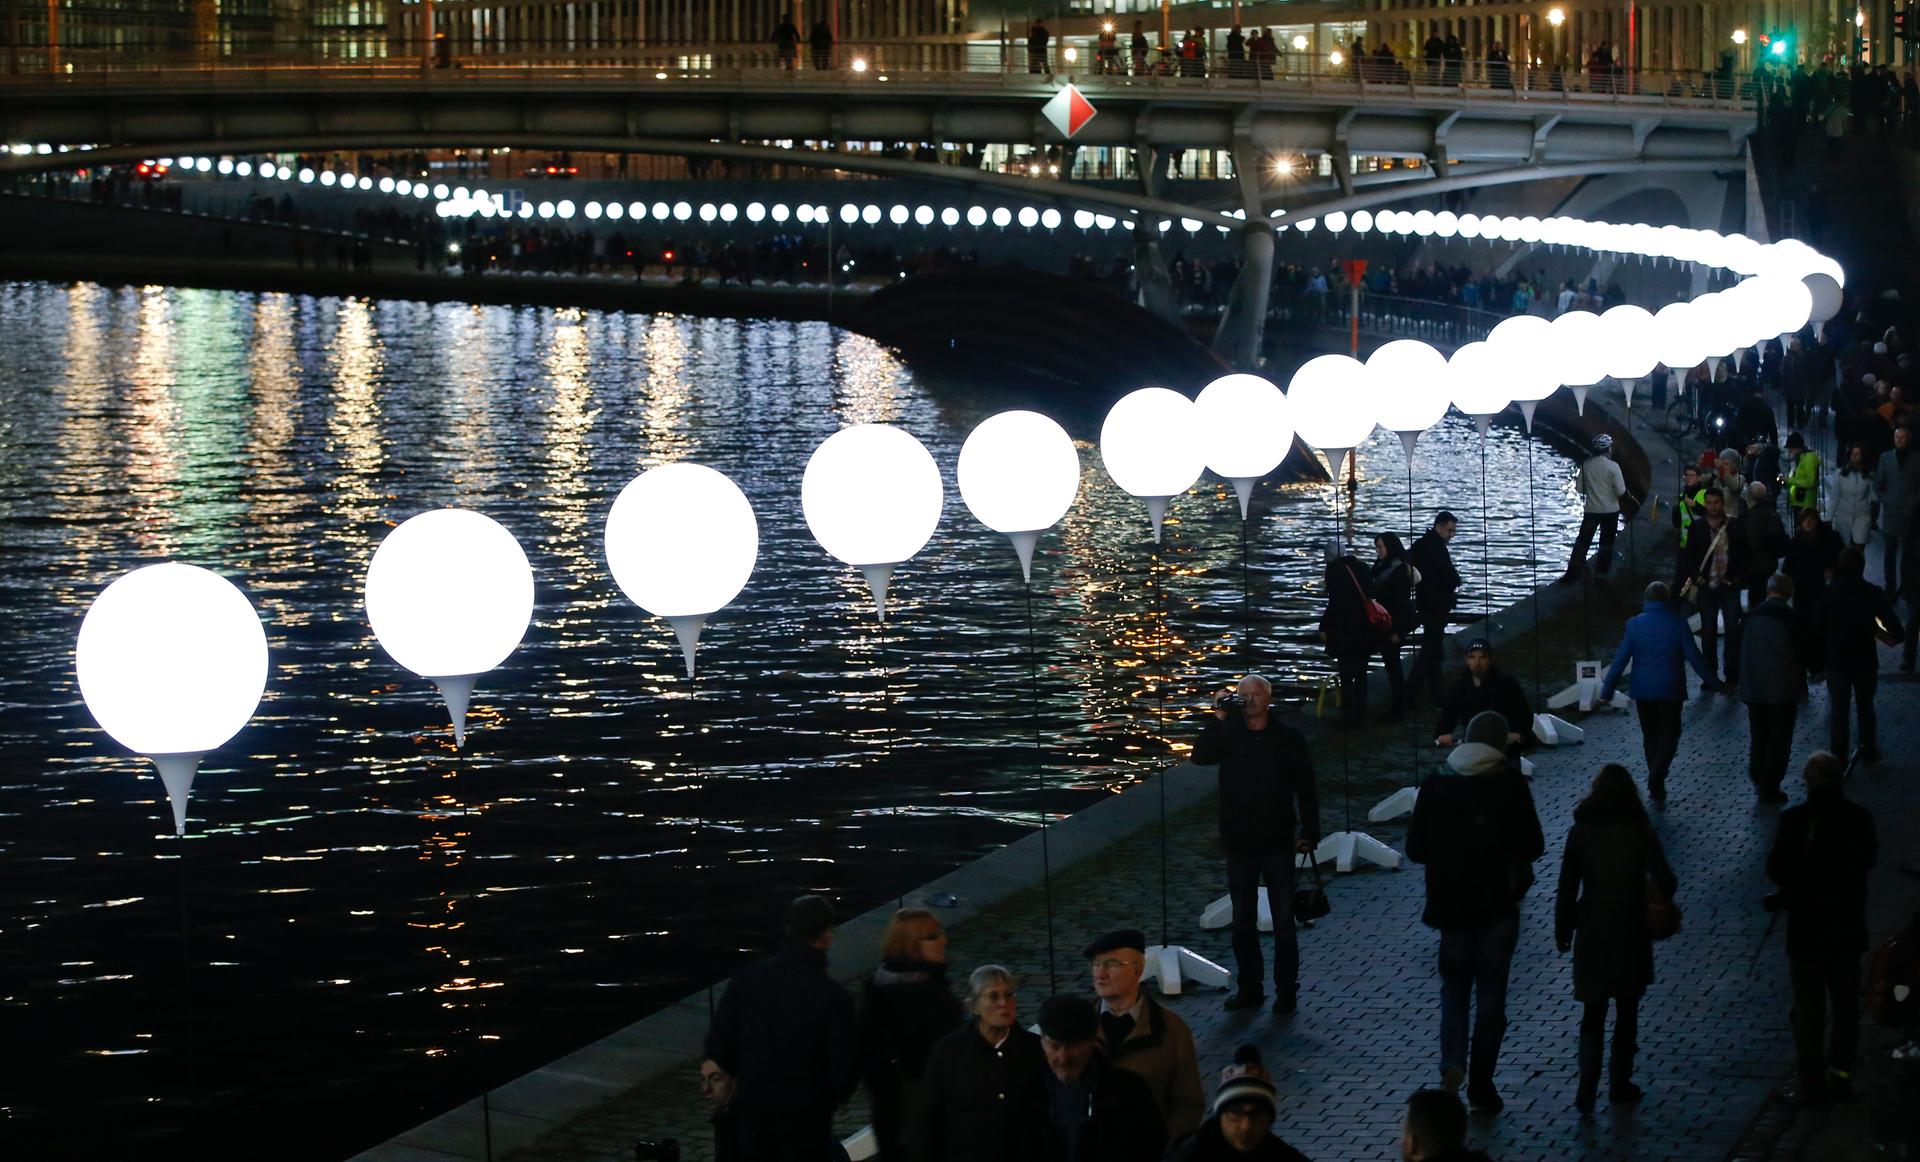 People walk under the "Lichtgrenze" installation along the River Spree in Berlin on November 8, 2014. A part of the inner city of Berlin was temporarily divided with a light installation to commemorate the 25th anniversary of the fall of the Berlin Wall.